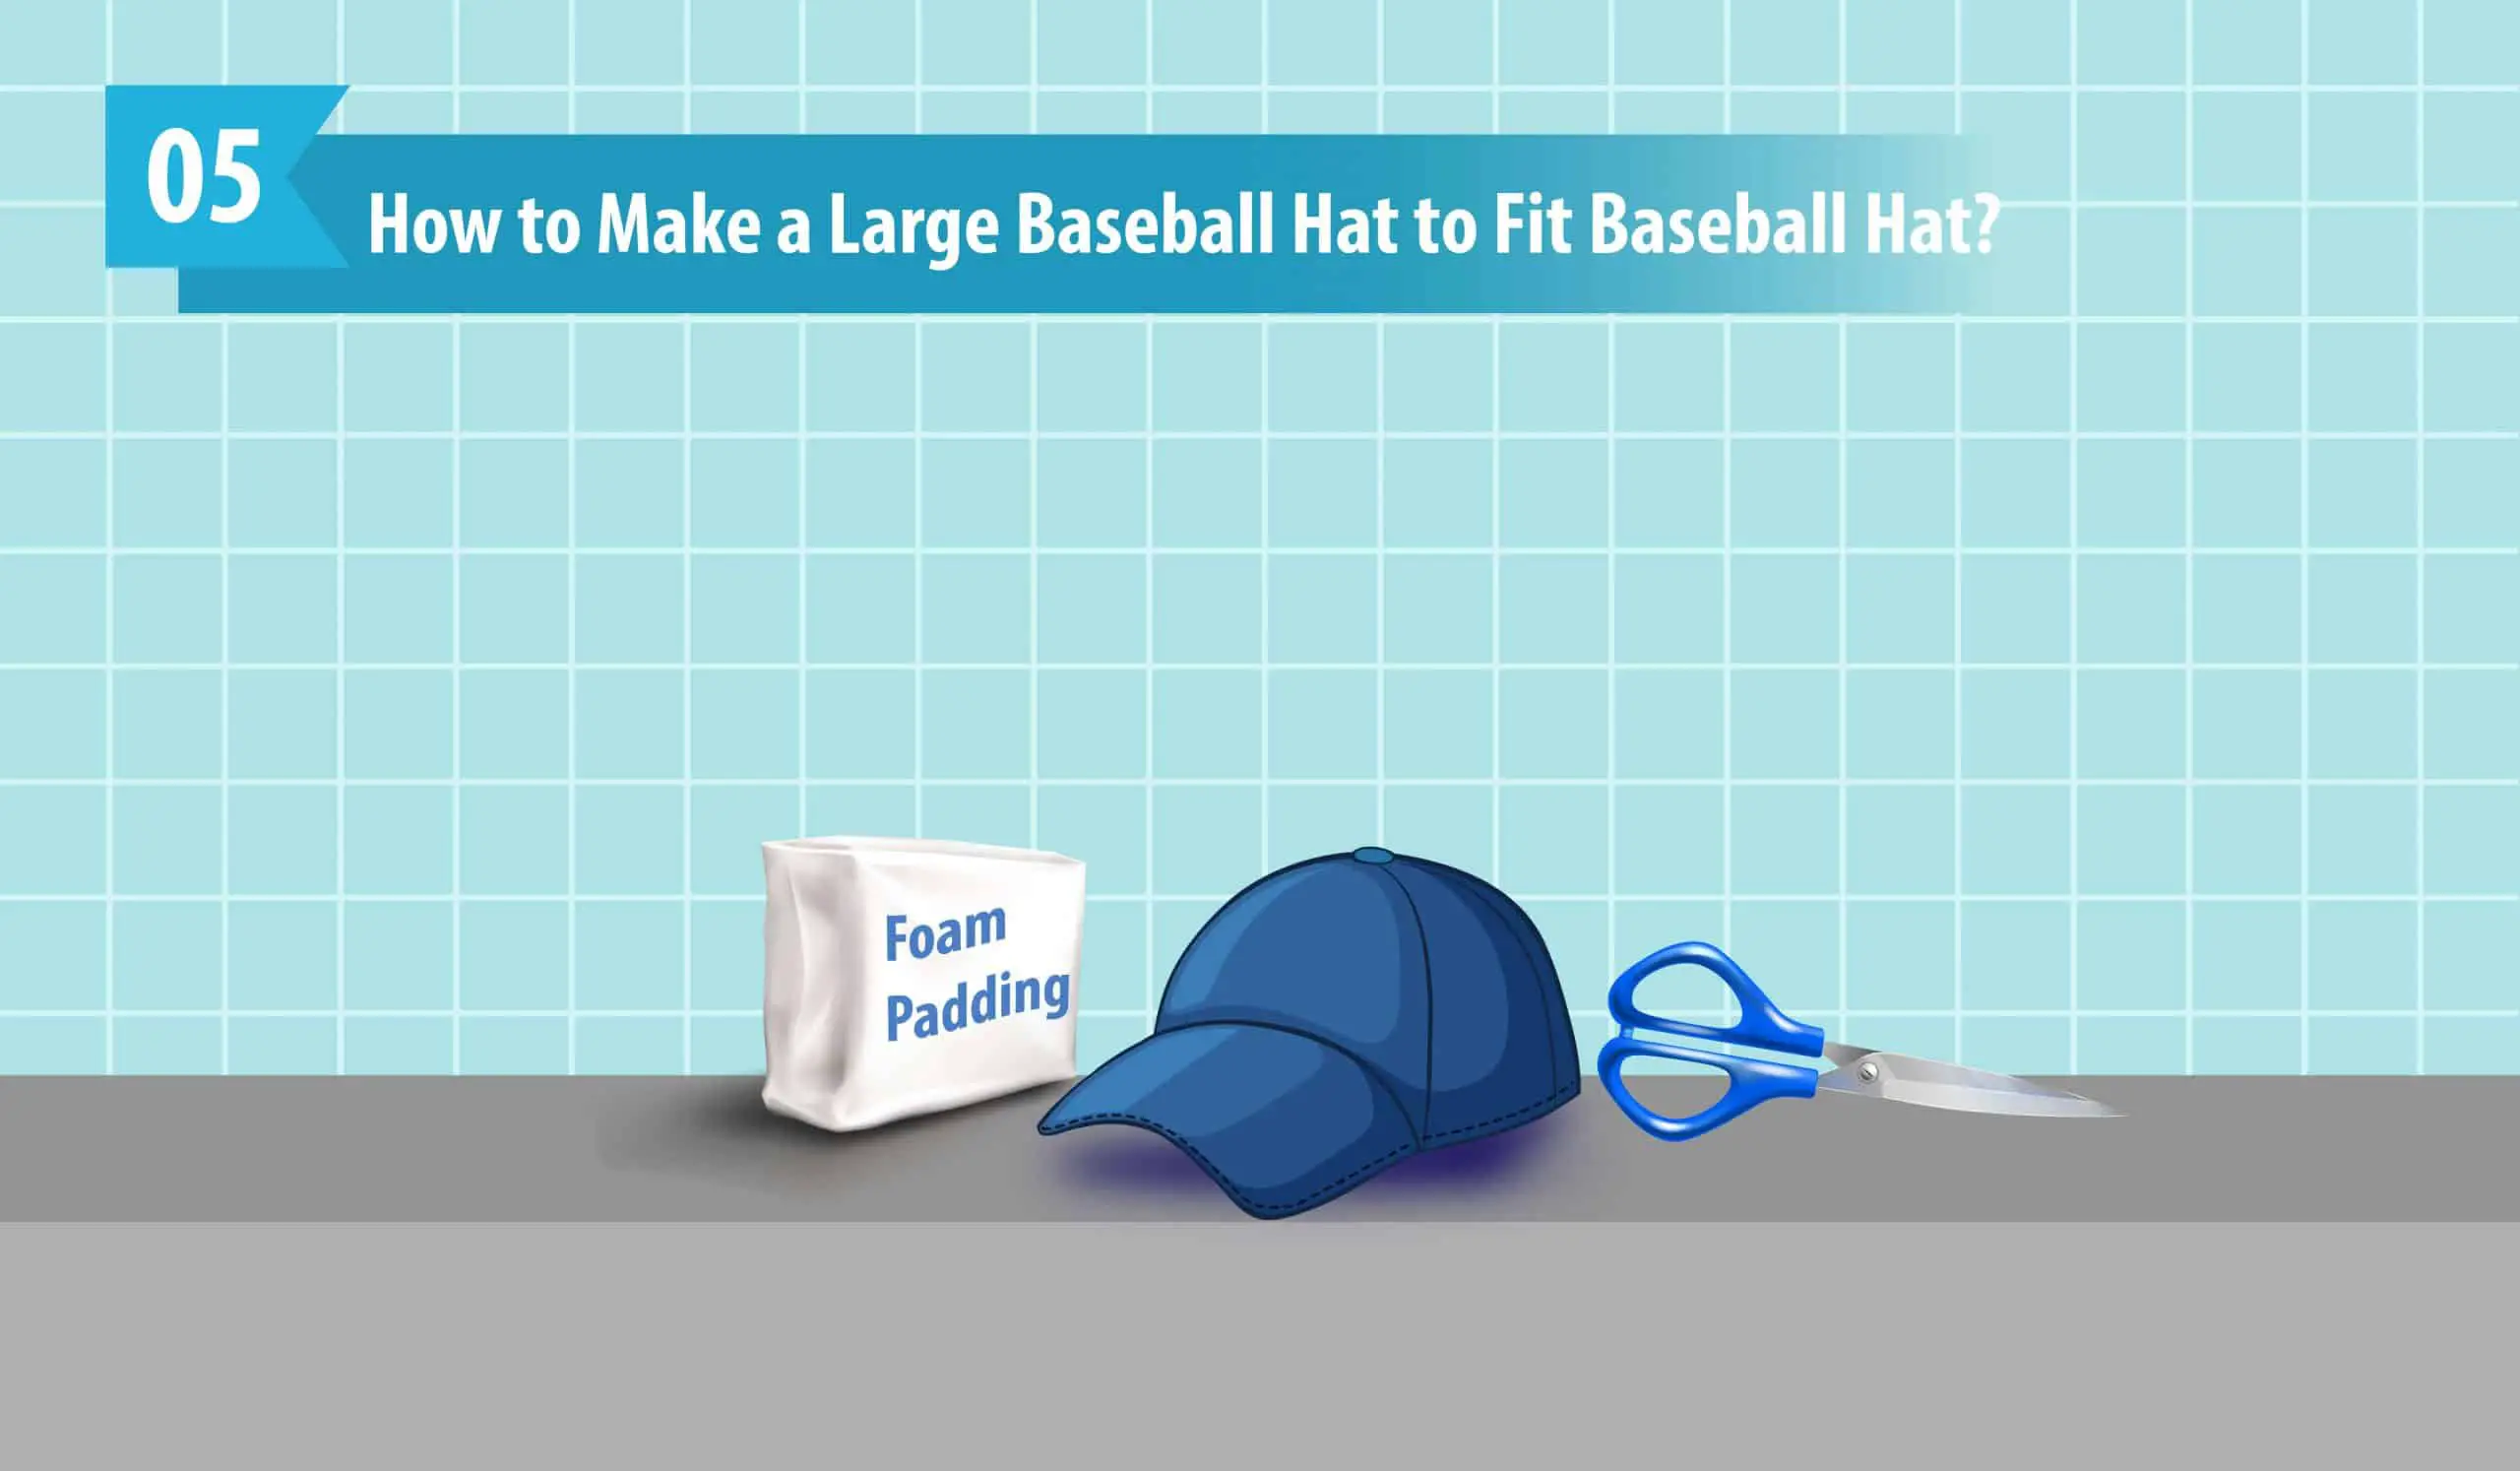 How to Make a Large Baseball Hat to Fit Baseball Hat